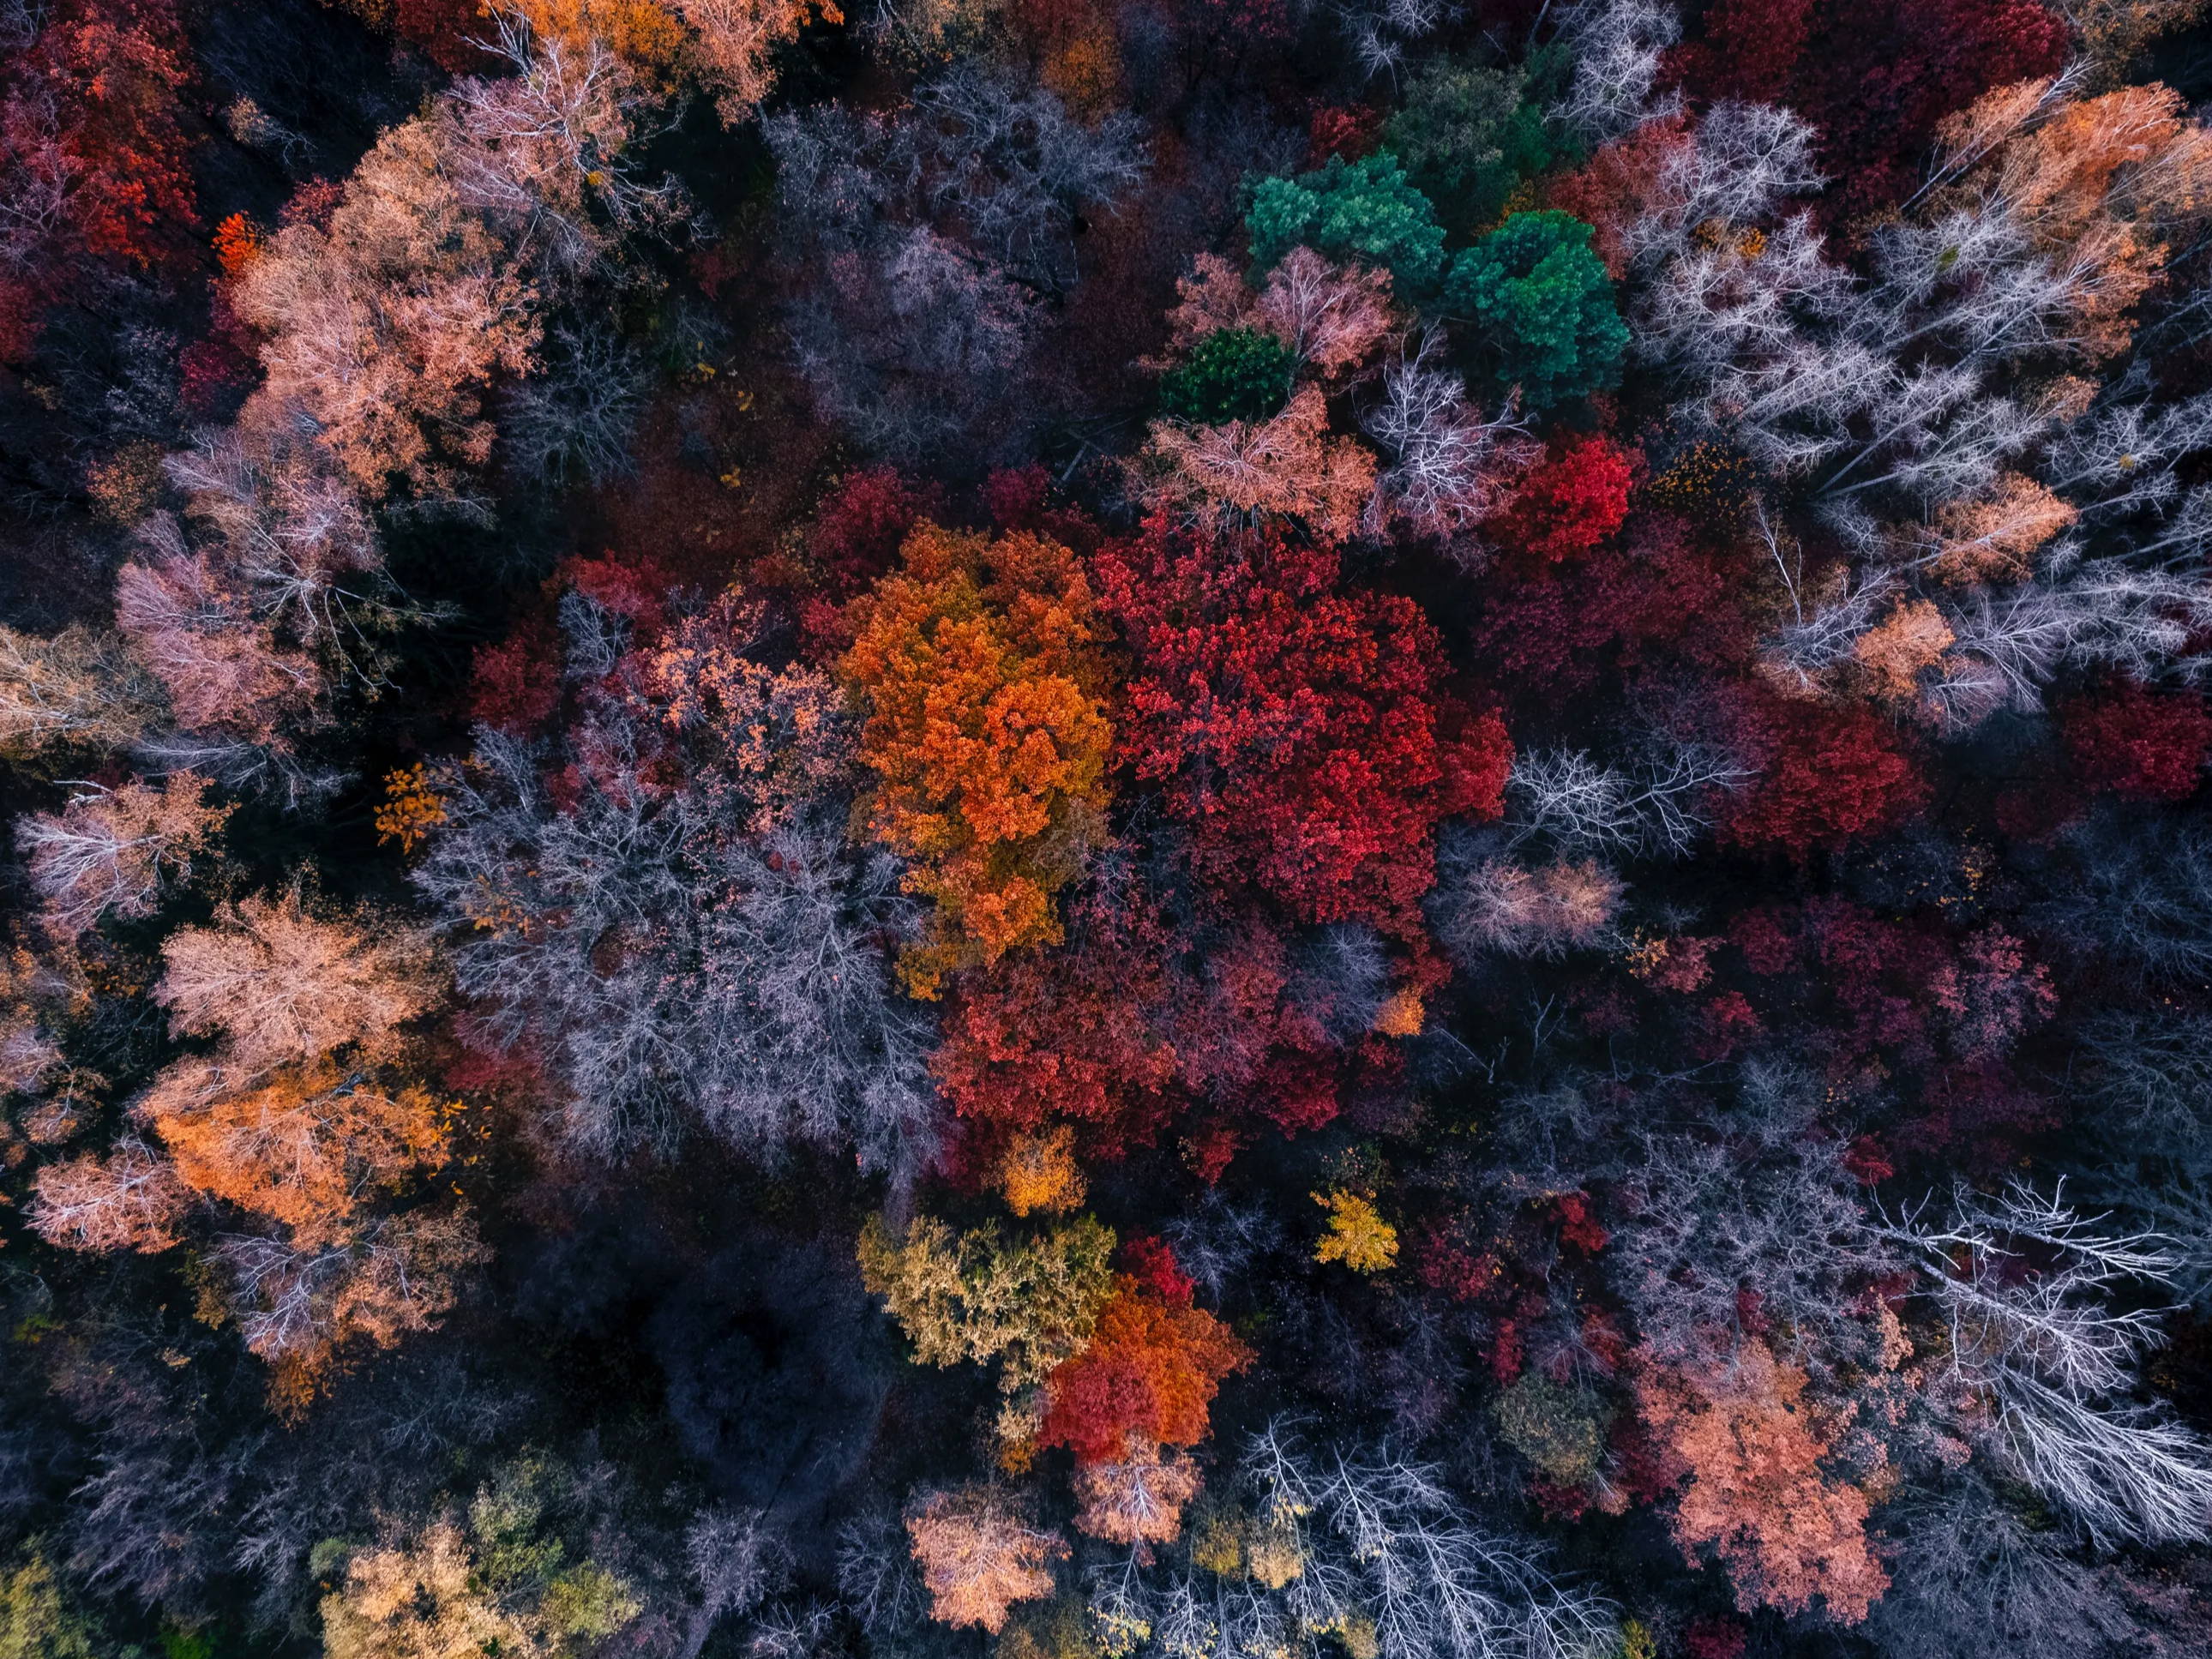 An overhead shot of red, orange, grey, and green trees